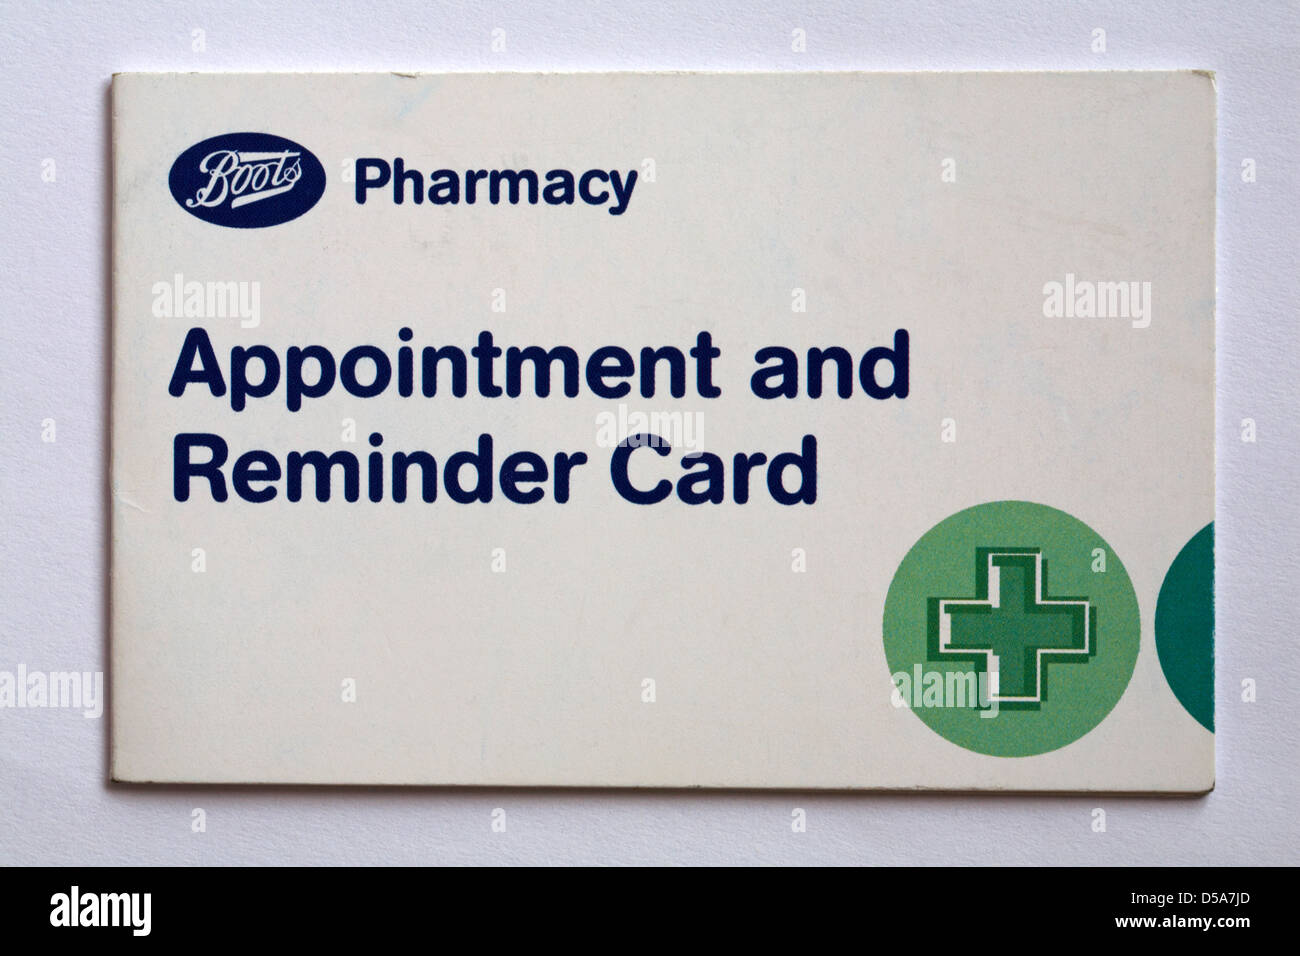 Boots Pharmacy appointment and reminder card isolated on white background Stock Photo